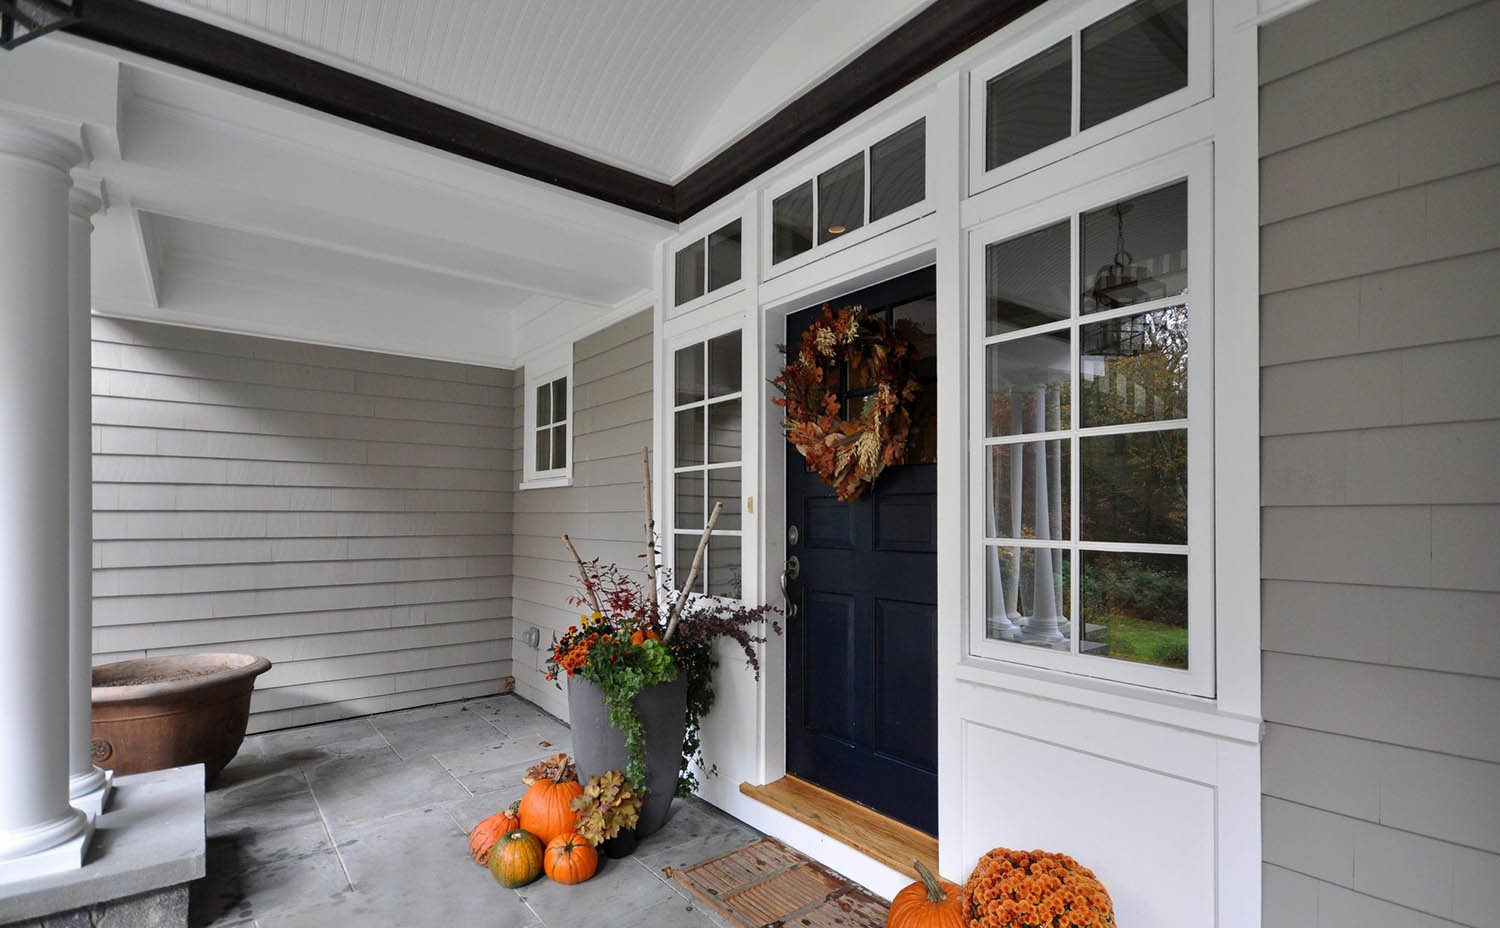 Gray house siding color scheme with dark blue front door. White trim and wall paneling. Blue stone front porch top. White columns.